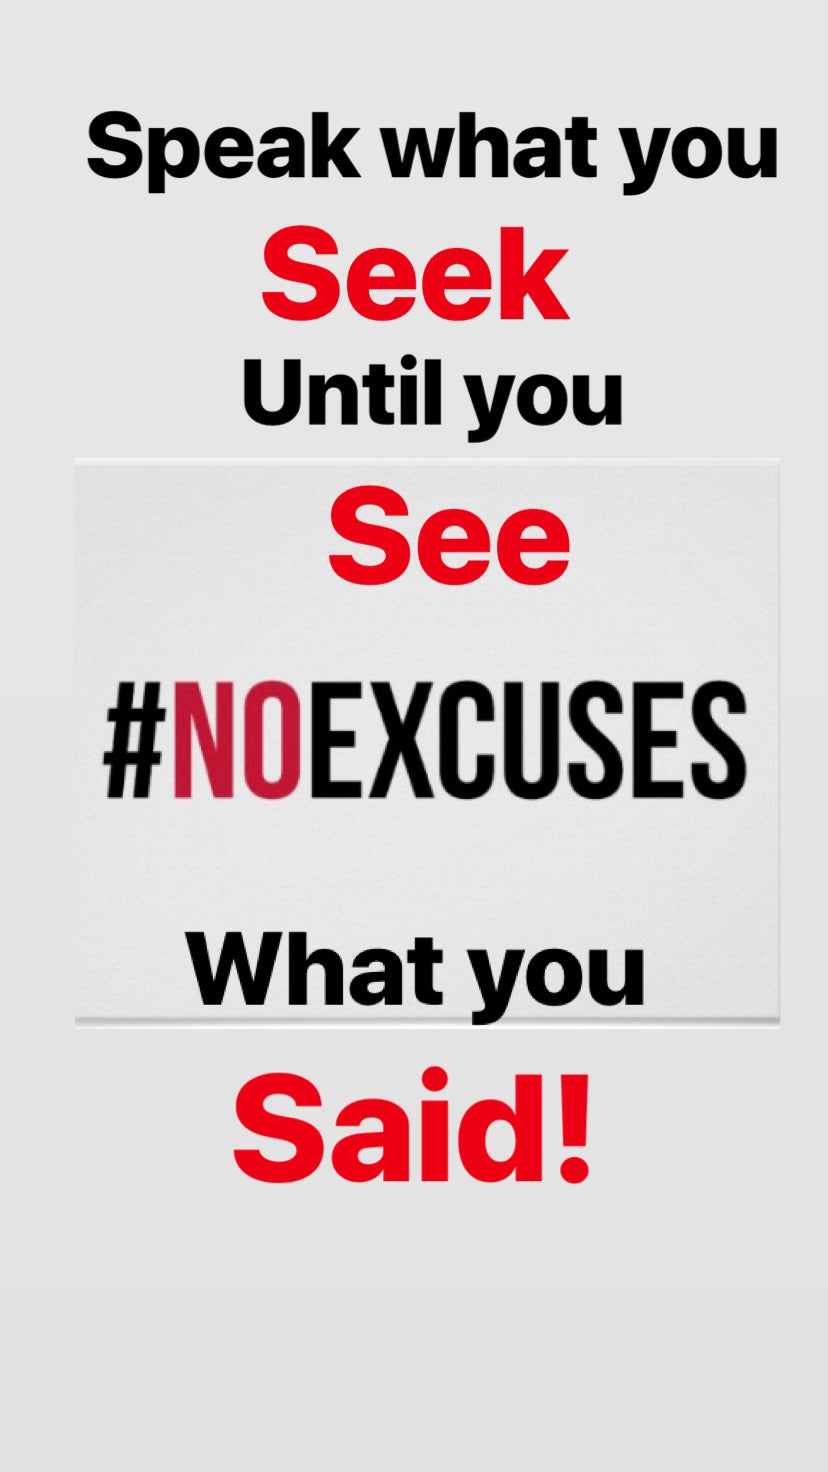 Stop Making Excuses!